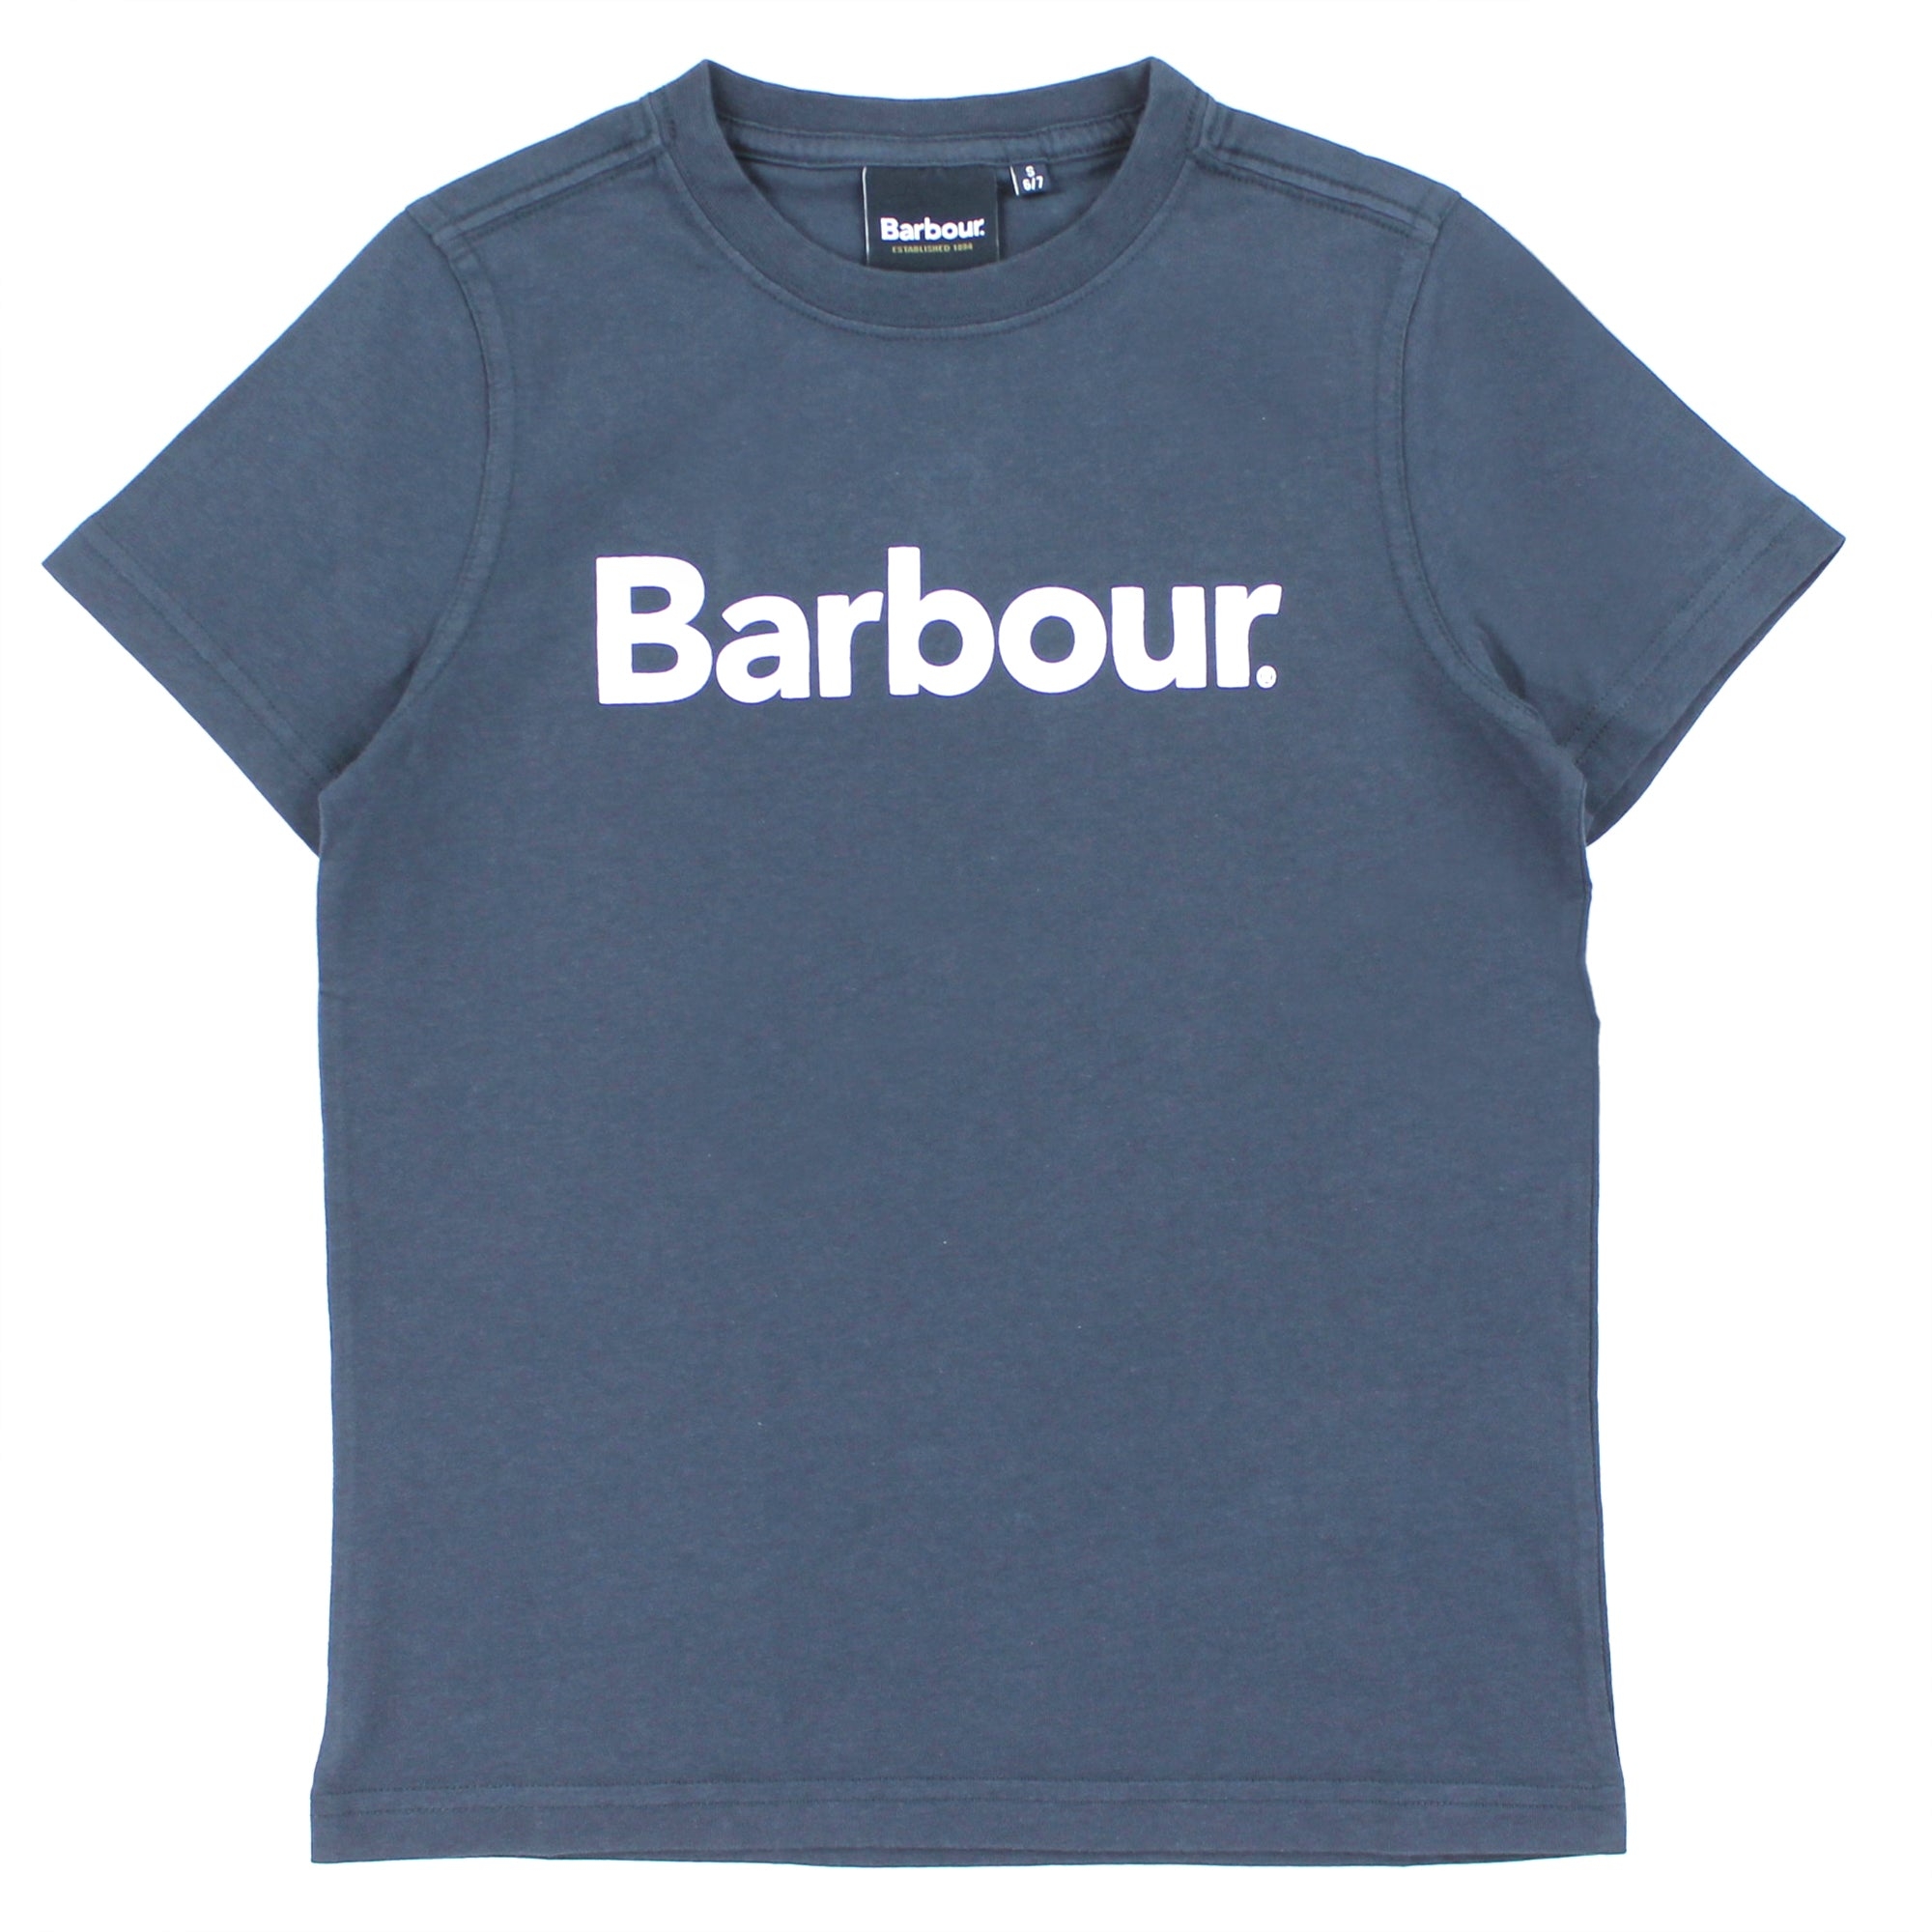 barbour kids barbour bambino t-shirt navy in jersey di cotone